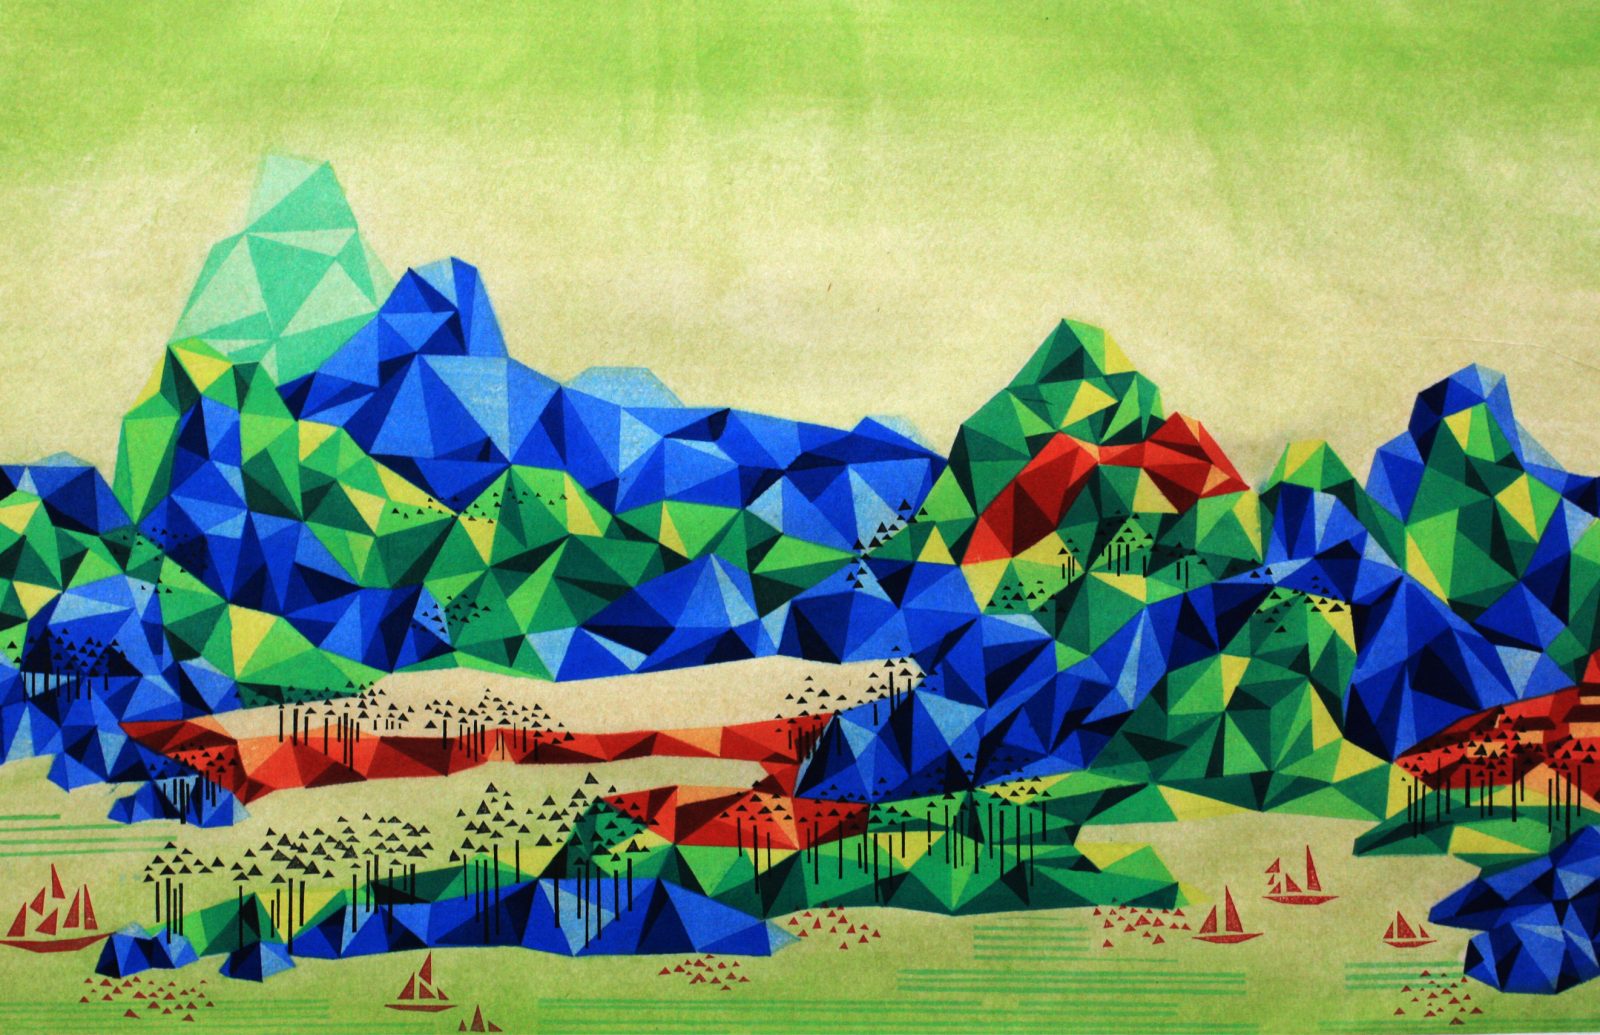 Reconstructed Landscape 《重构山水-6》, 50×78cm, 2014,waterbased woodcut